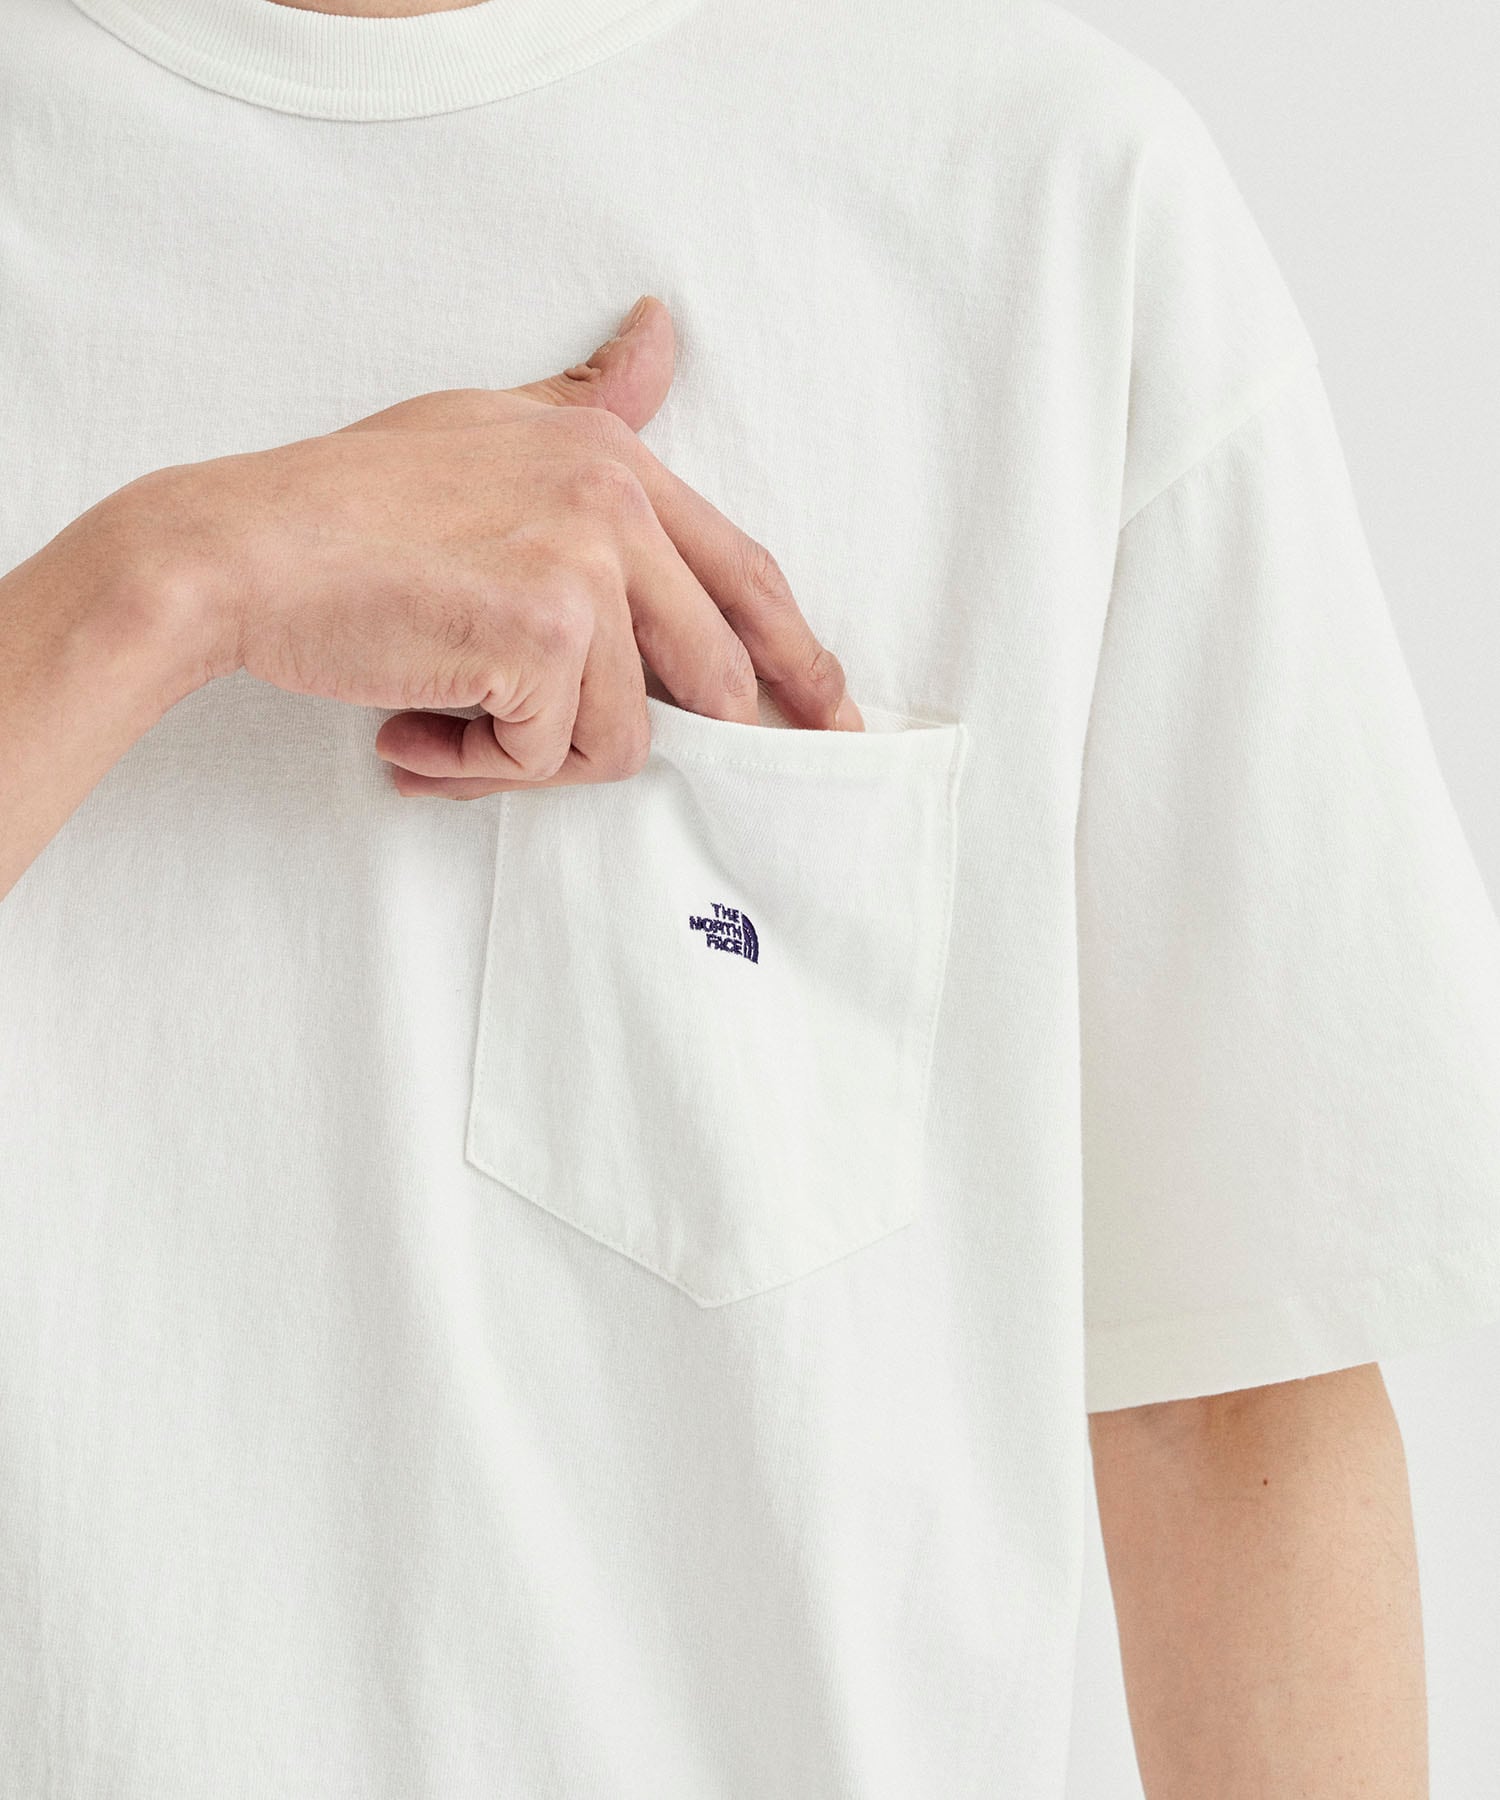 7oz Pocket Tee THE NORTH FACE PURPLE LABEL